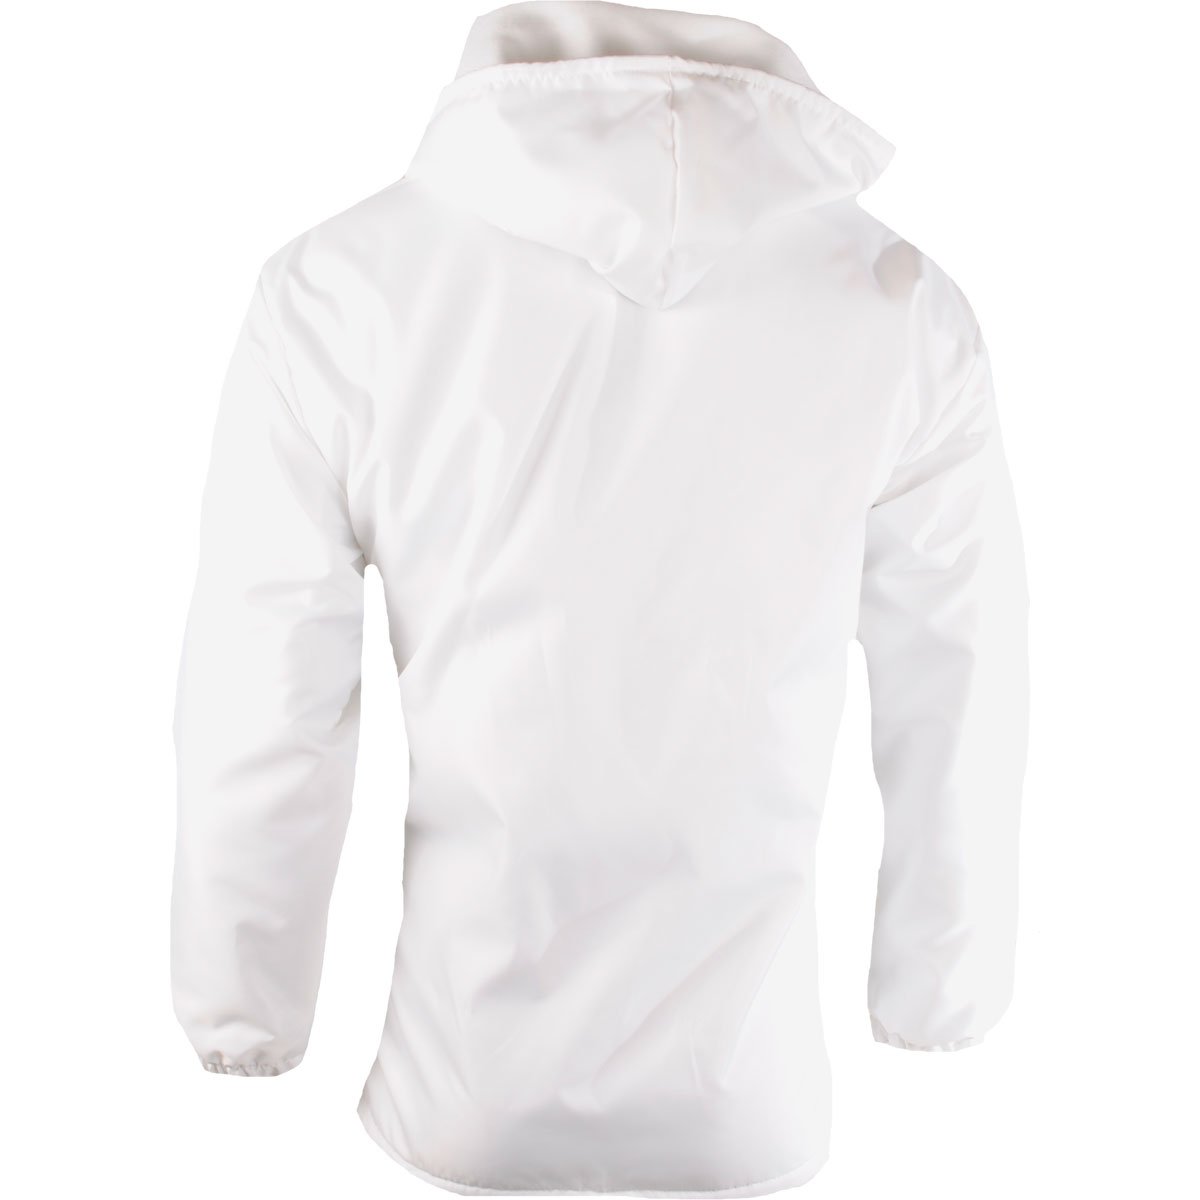 Designer Fleece Lined Hooded Bowling Jackets - White